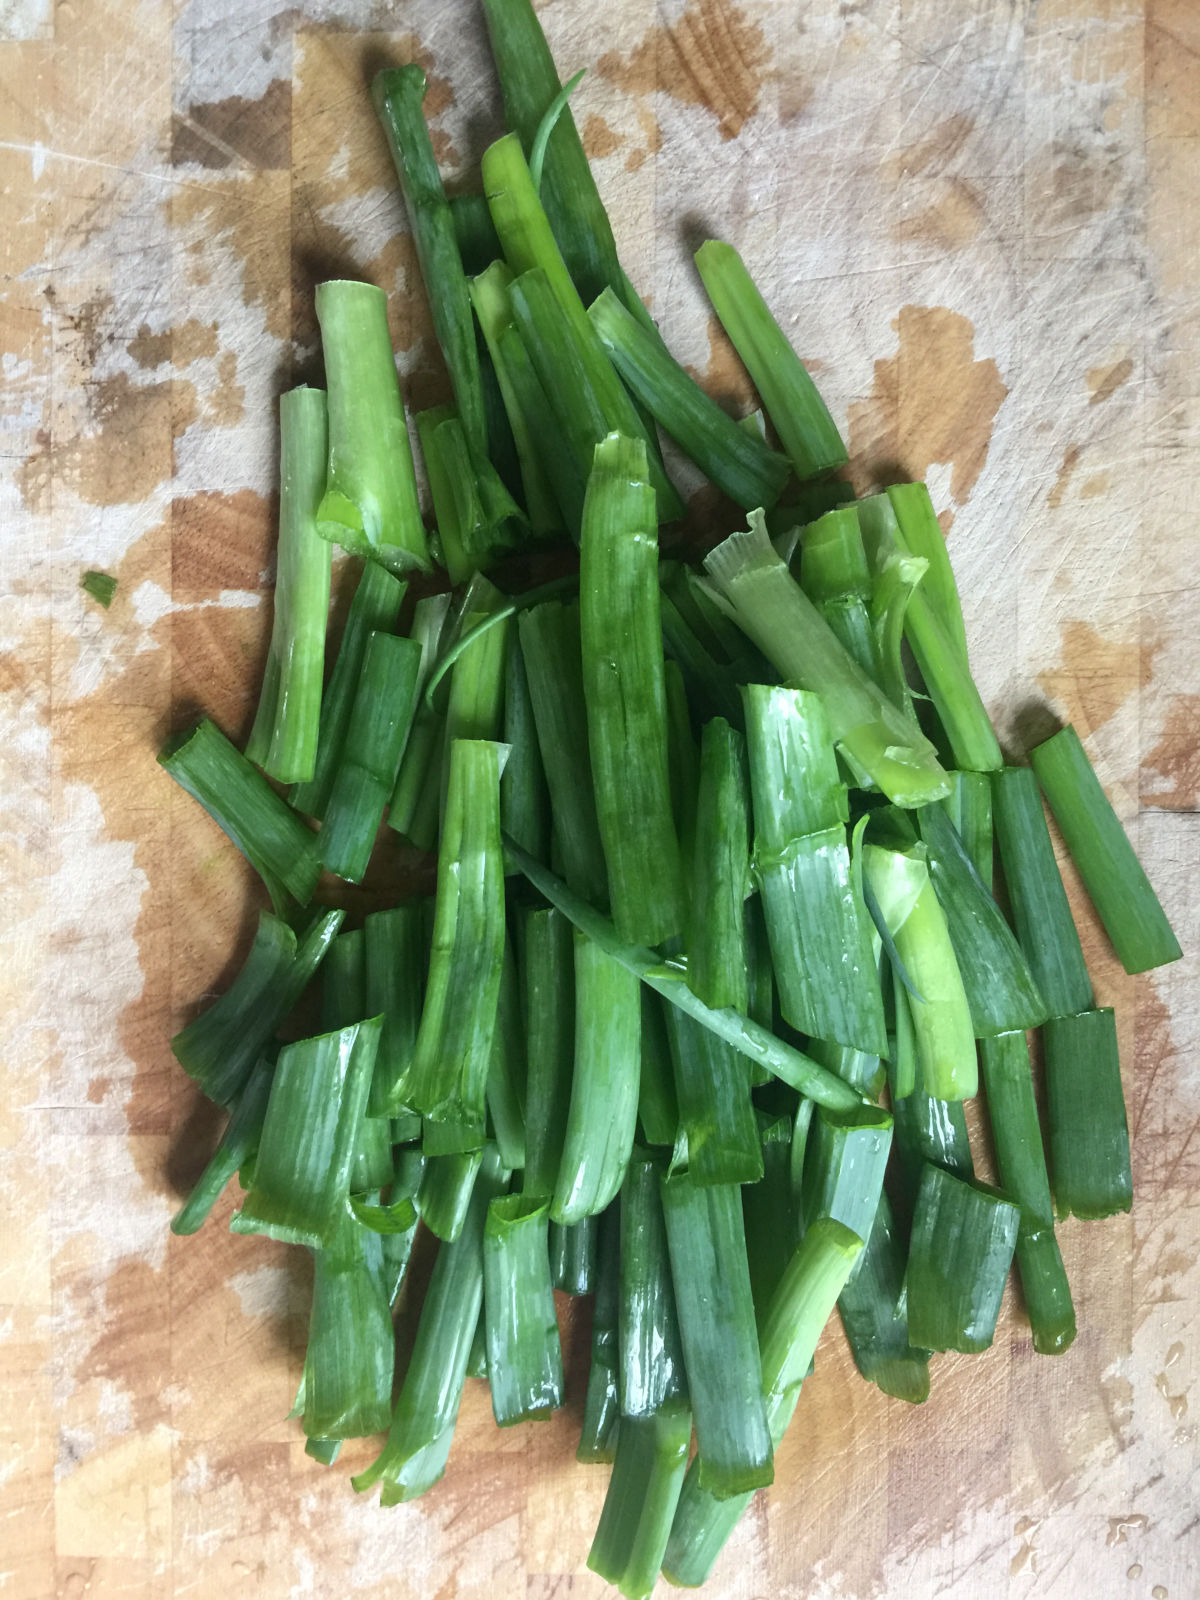 A bunch of 2-inch long pieces of spring onions (green part) on a wooden cutting board.